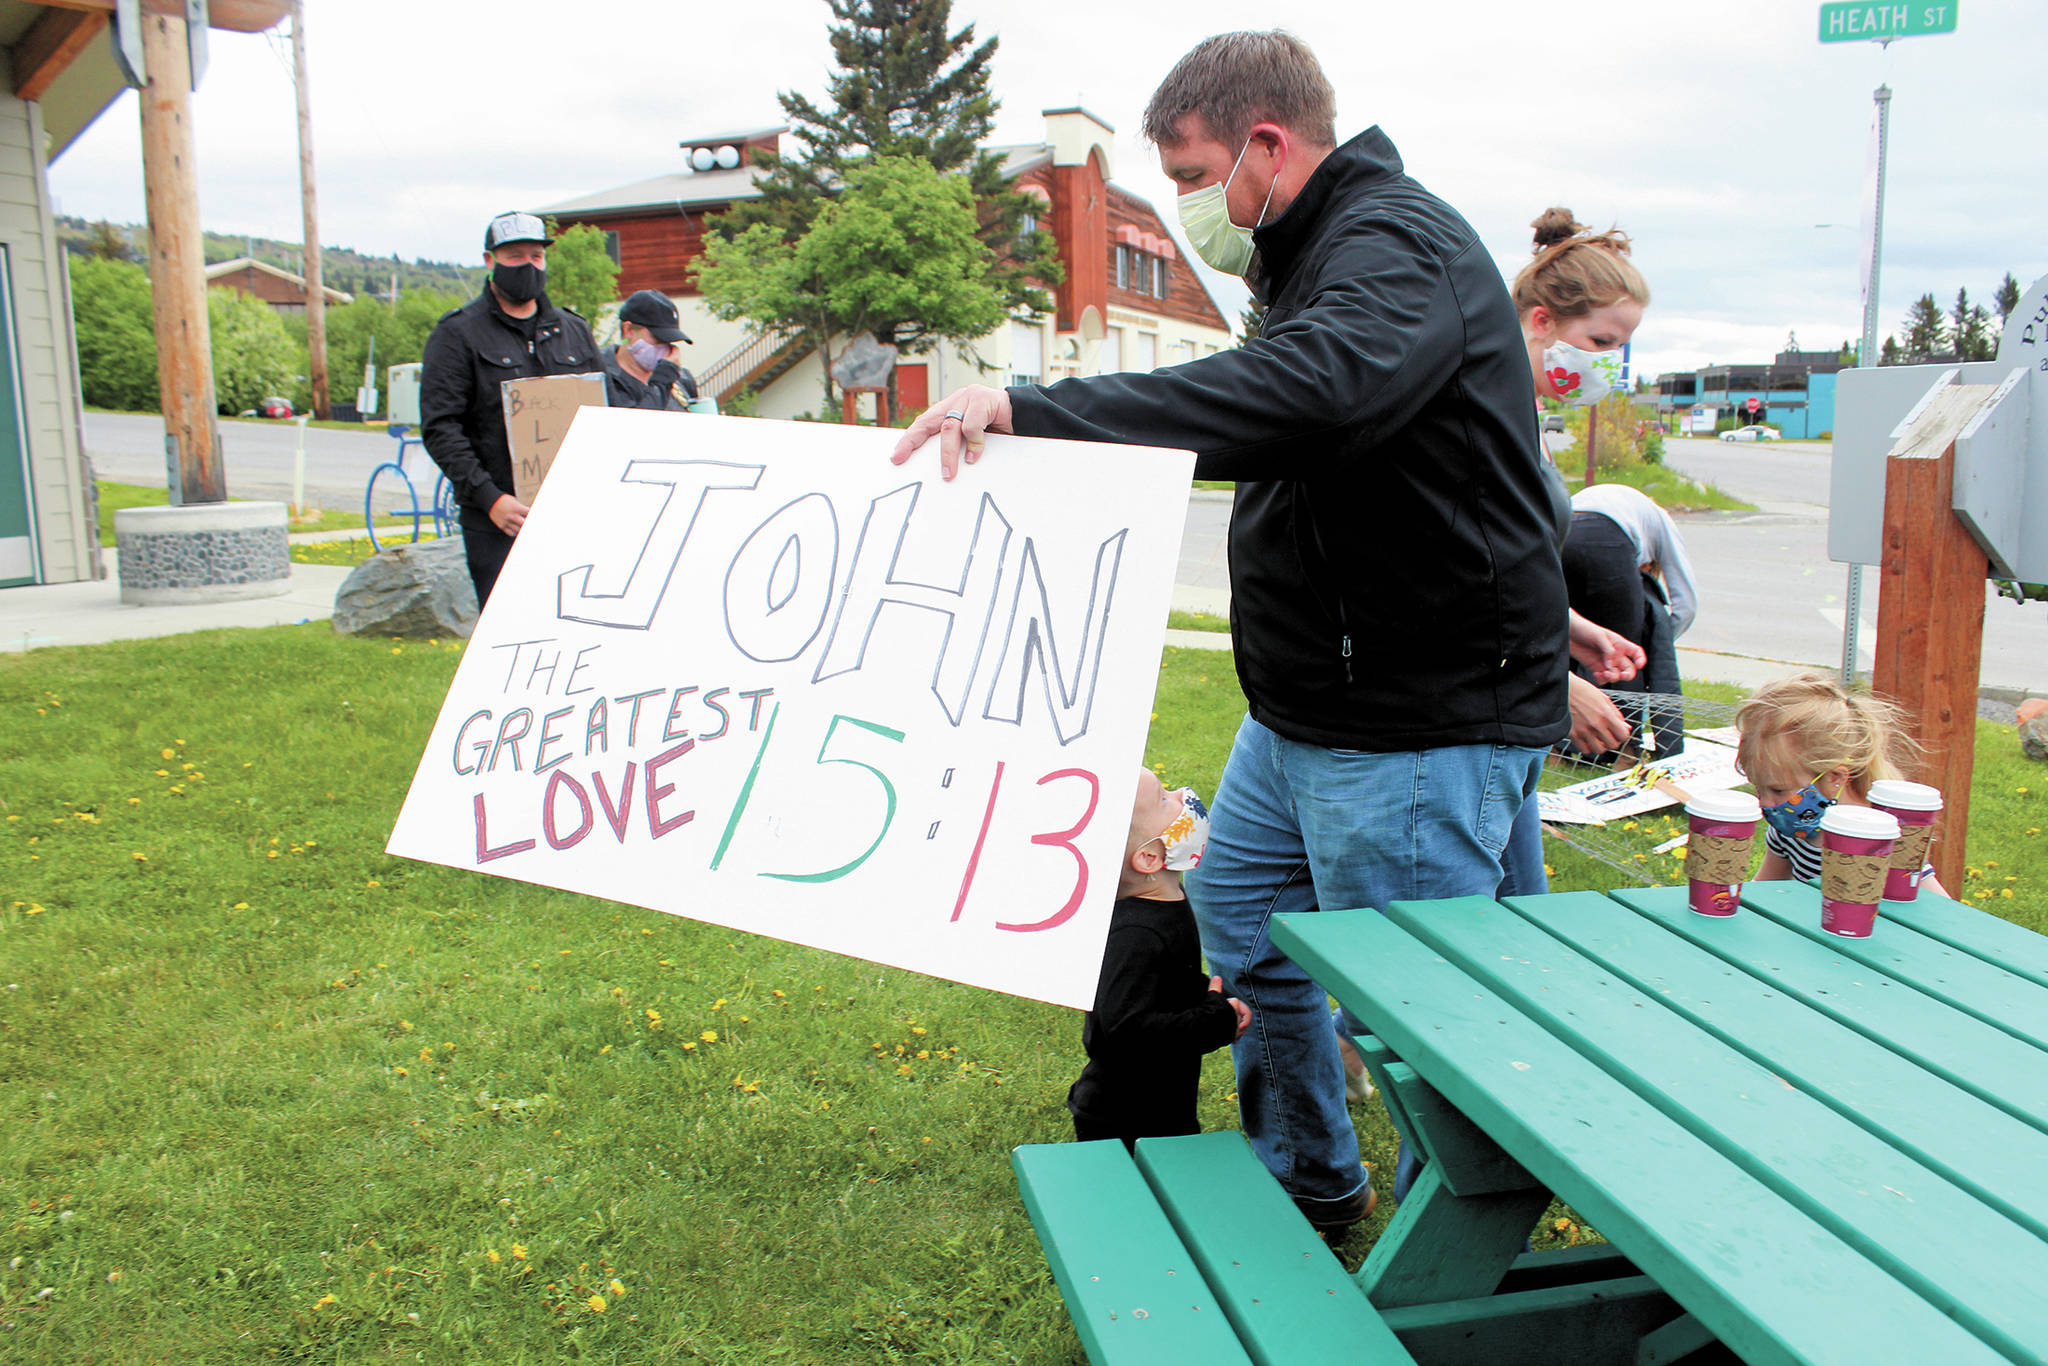 A participant in a Black Lives Matter demonstration Tuesday, June 2, 2020 at WKFL Park in Homer, Alaska holds a sign referring to John 15:13, which reads Greater love has no one than this: to lay down one’s life for one’s friends.” (Photo by Megan Pacer/Homer News)